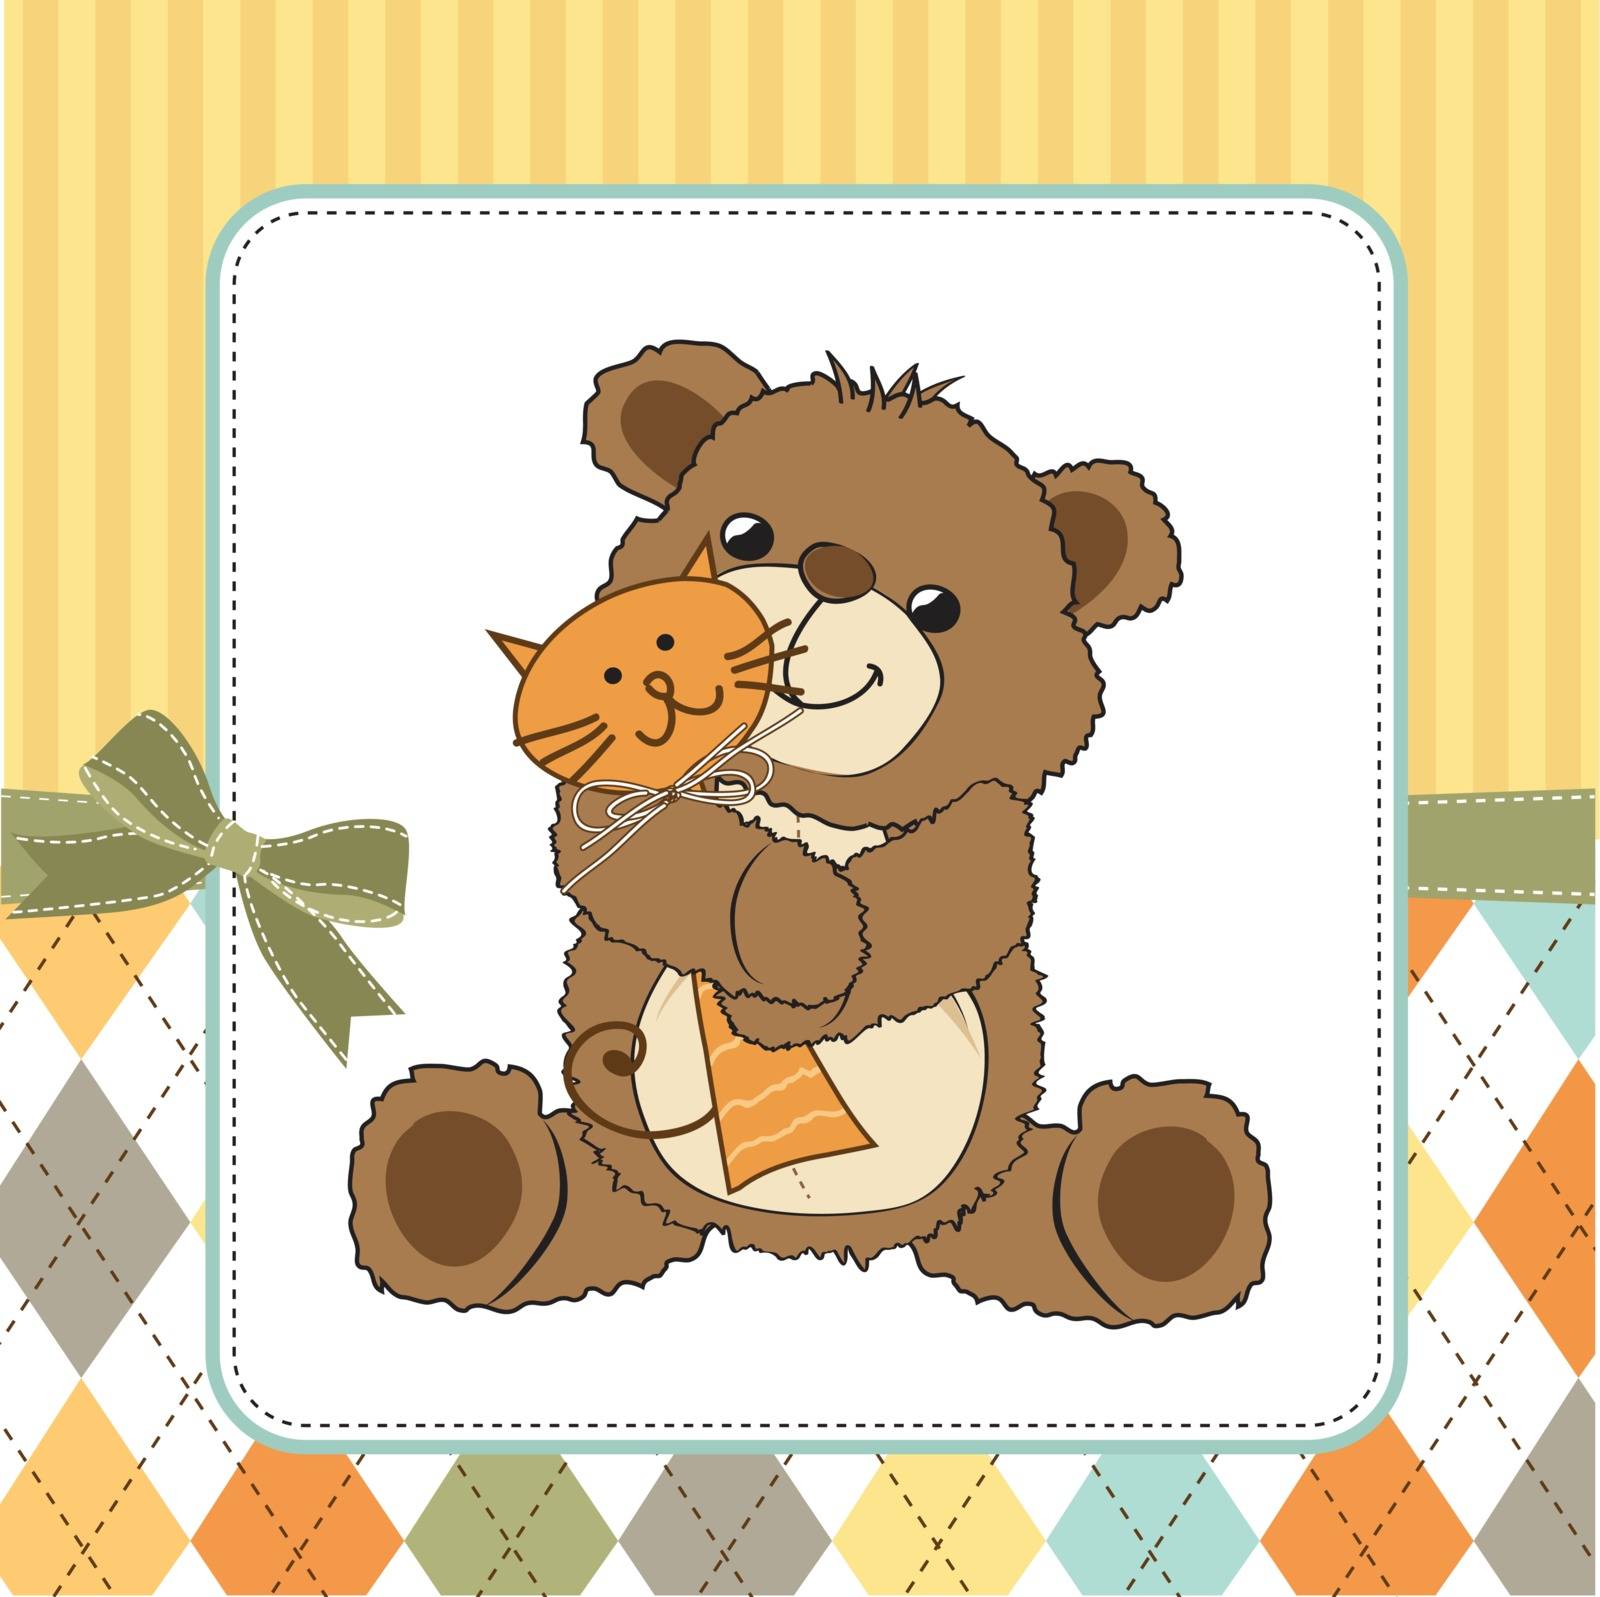 childish greeting card with teddy bear and his toy by balasoiu